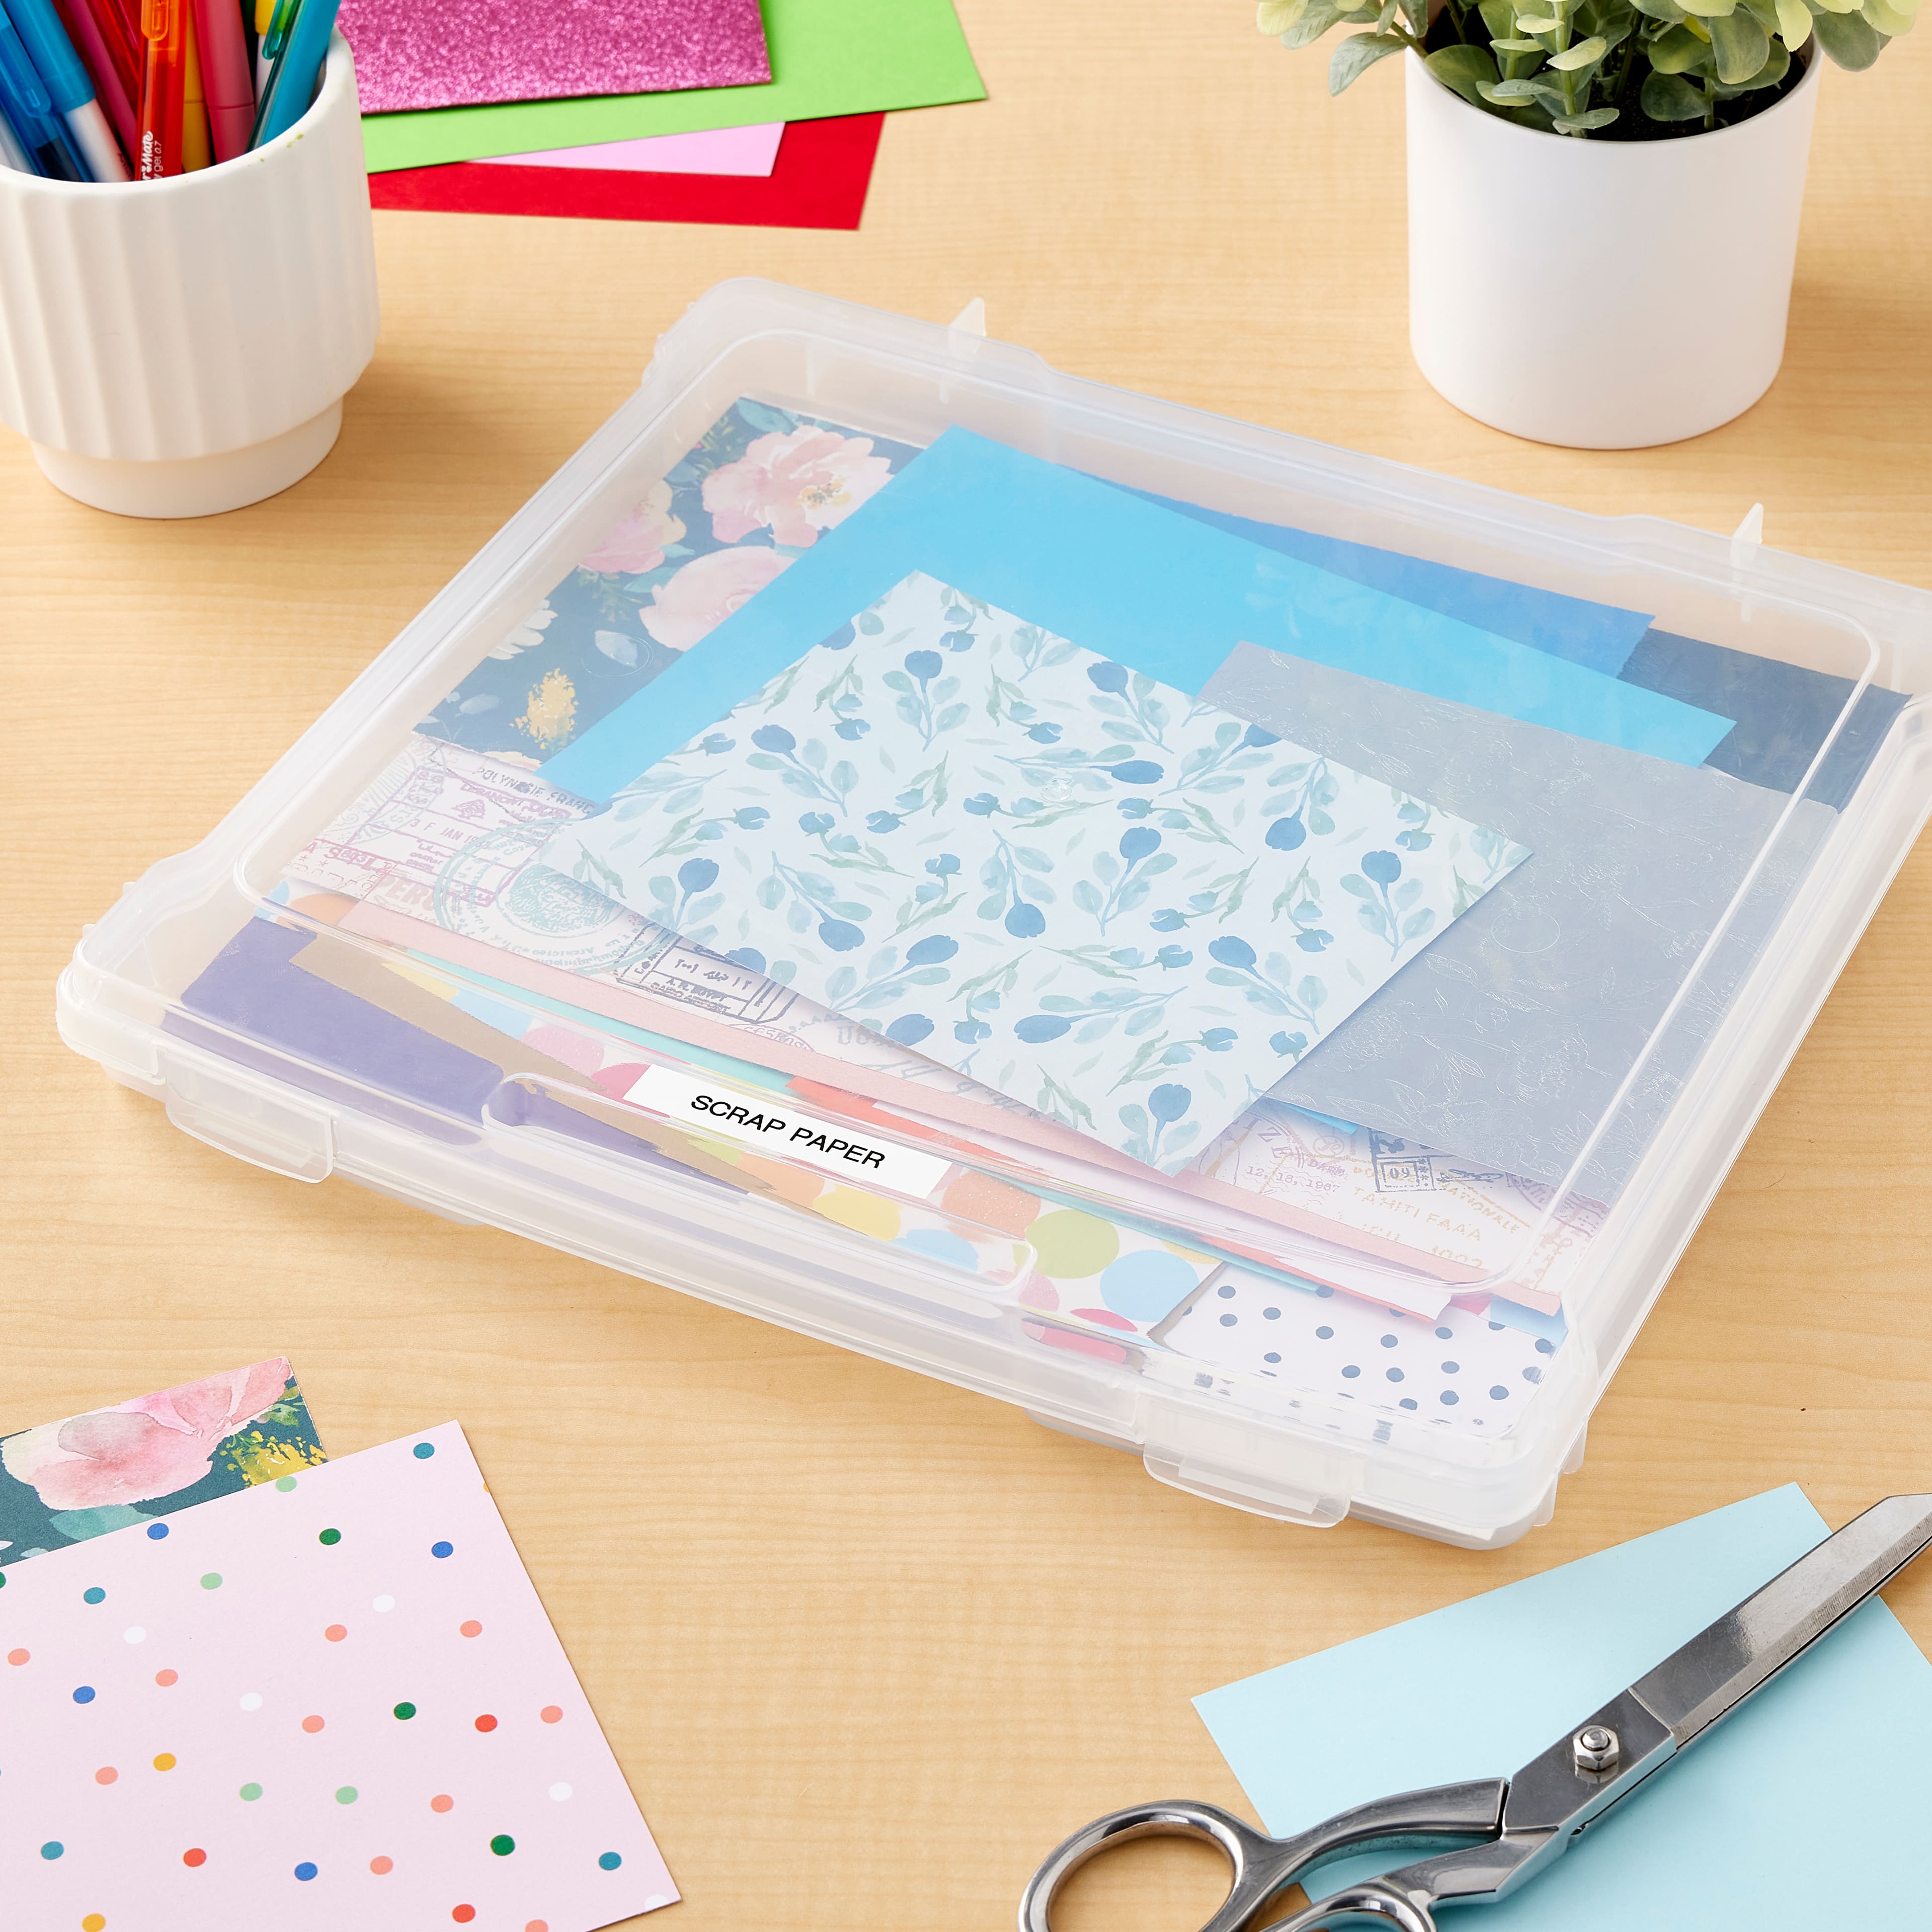 Clear Photo Storage Case by Simply Tidy | 8.4 x 8.5 x 6.4 | Michaels